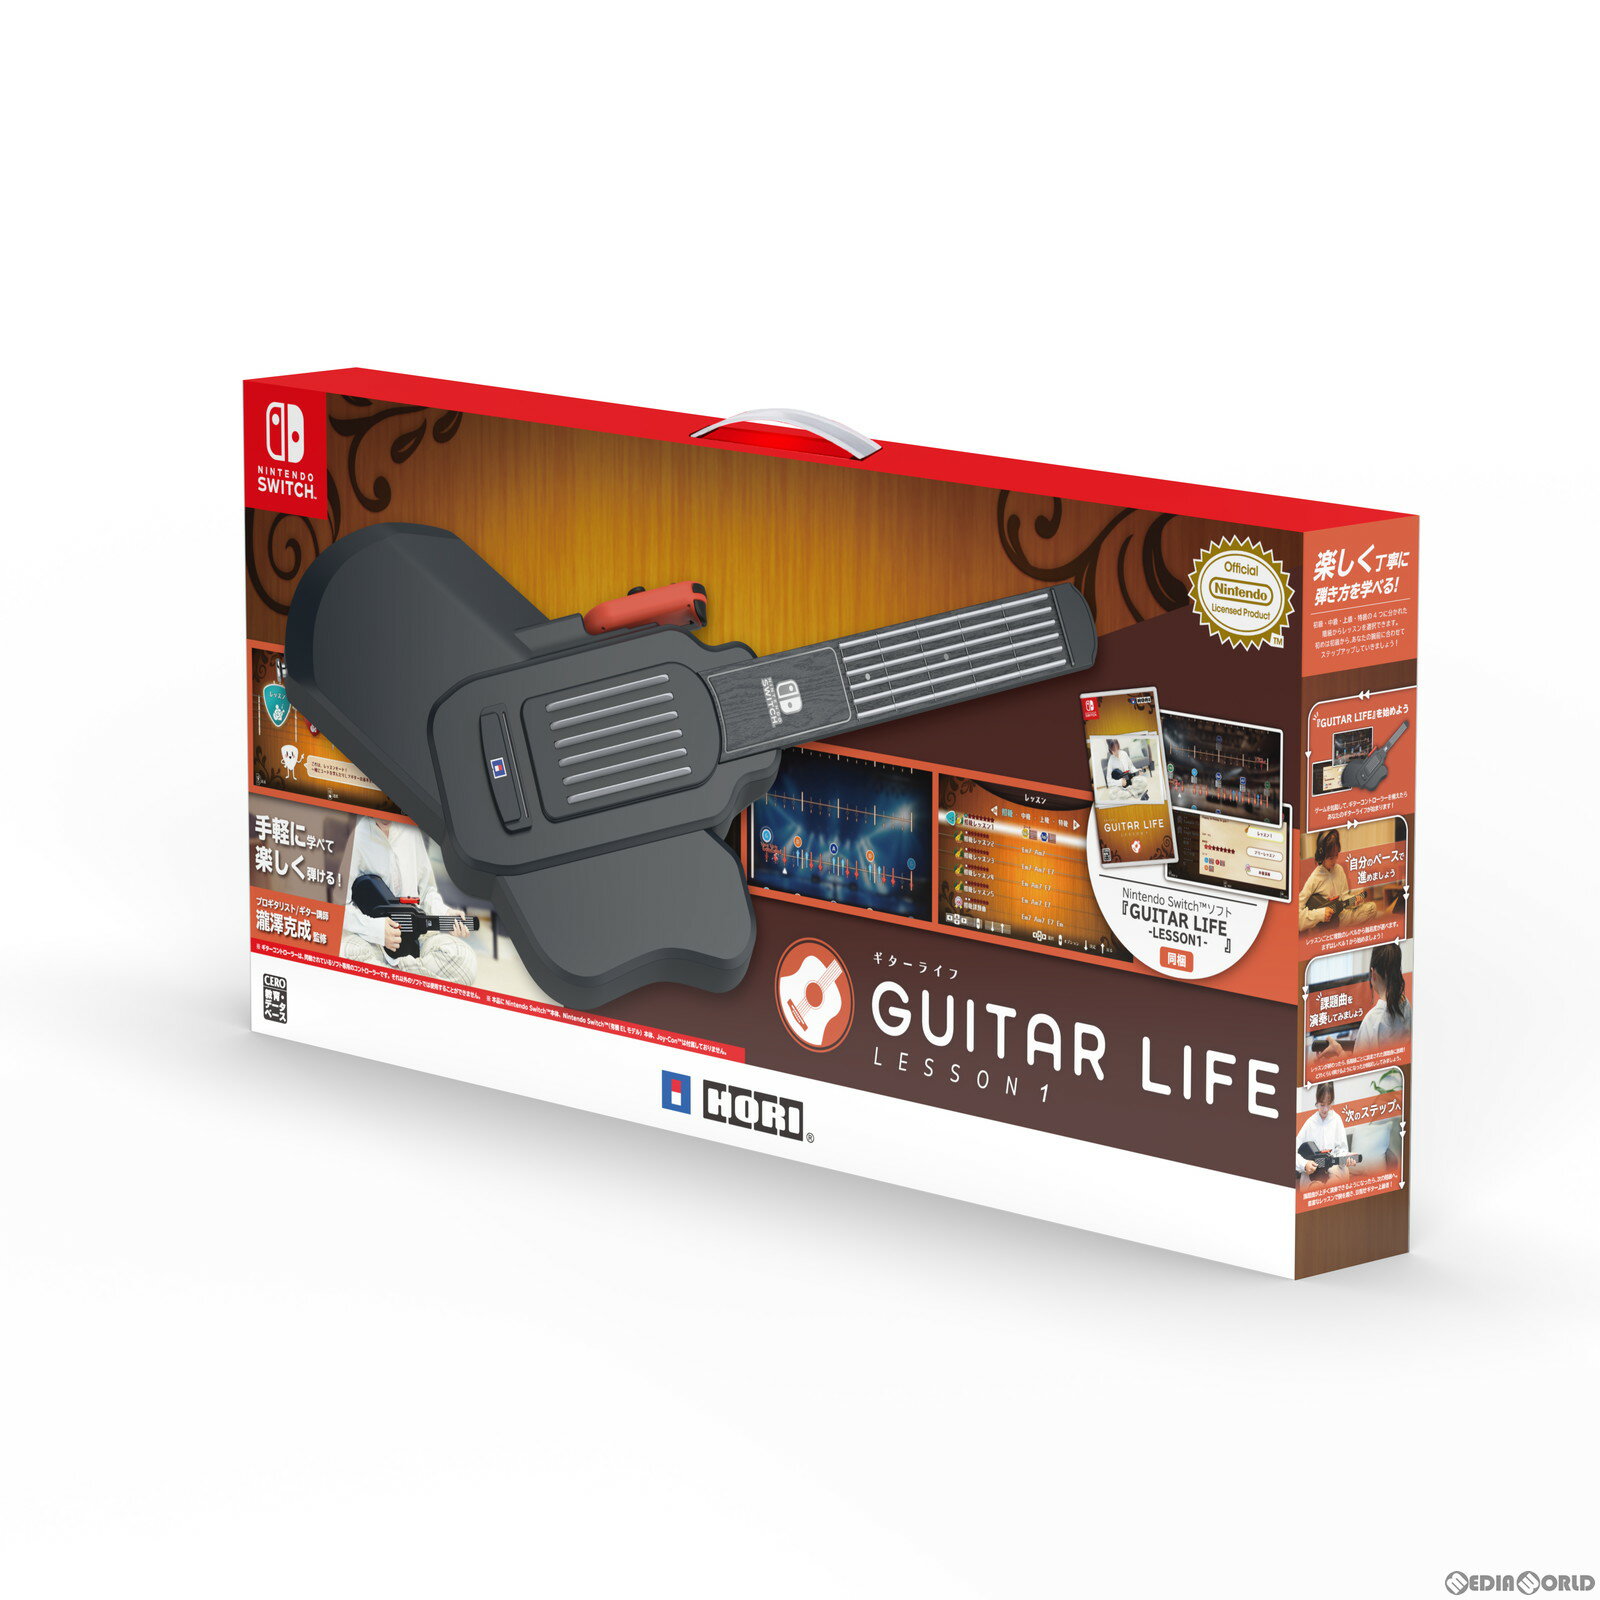 GUITAR LIFE Lesson1 for Nintendo Switch(ギターライフ レッスン1 フォー ニンテンドースイッチ) 専用ギターコントローラー同梱(20240425)